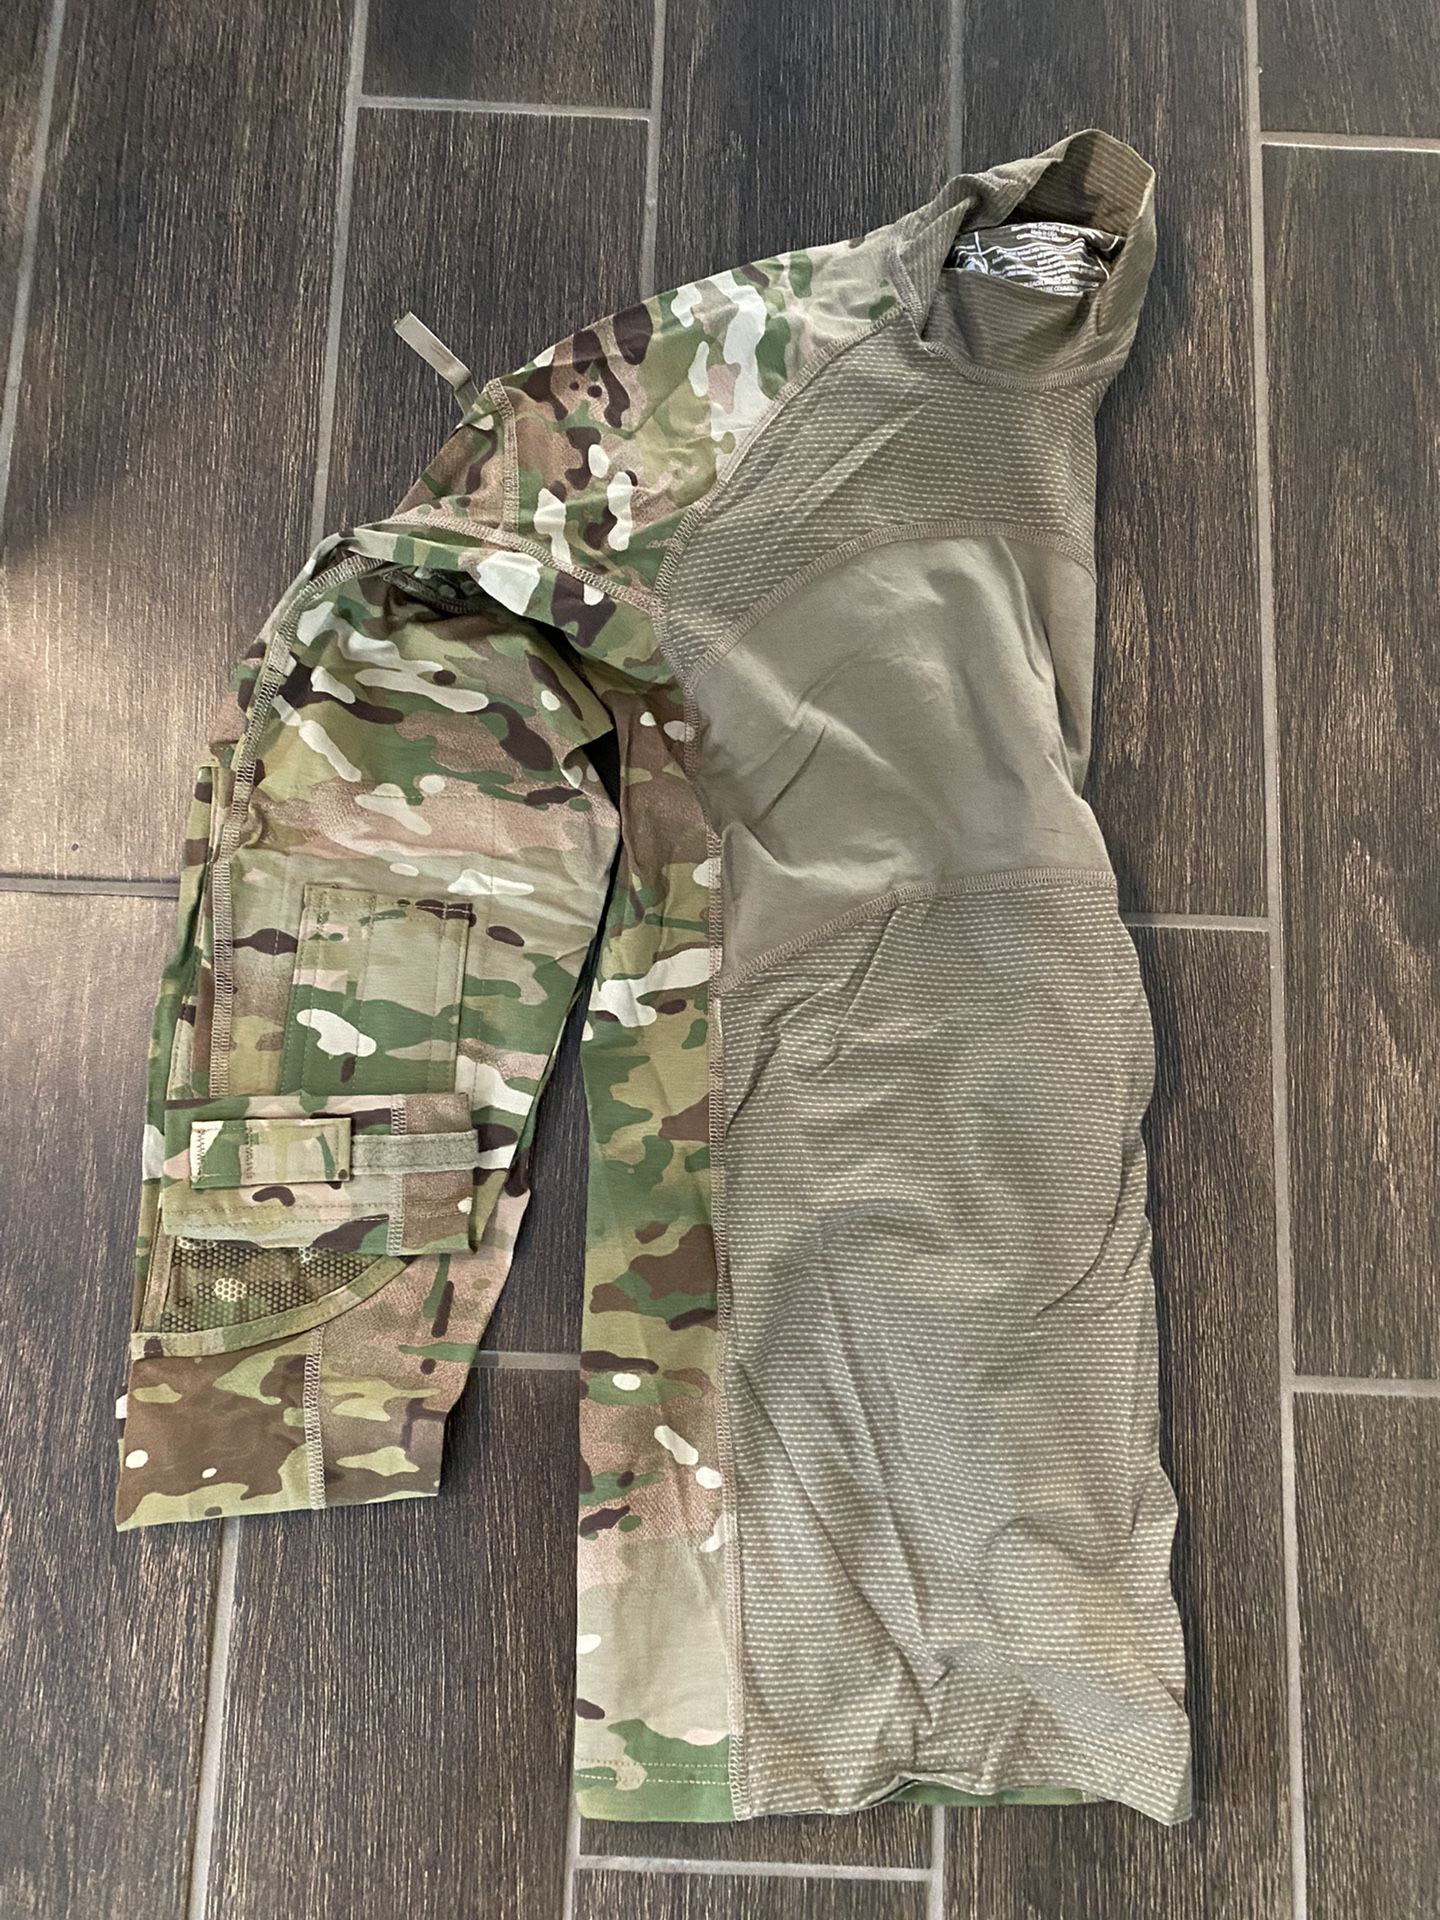 Military Clothing/gear